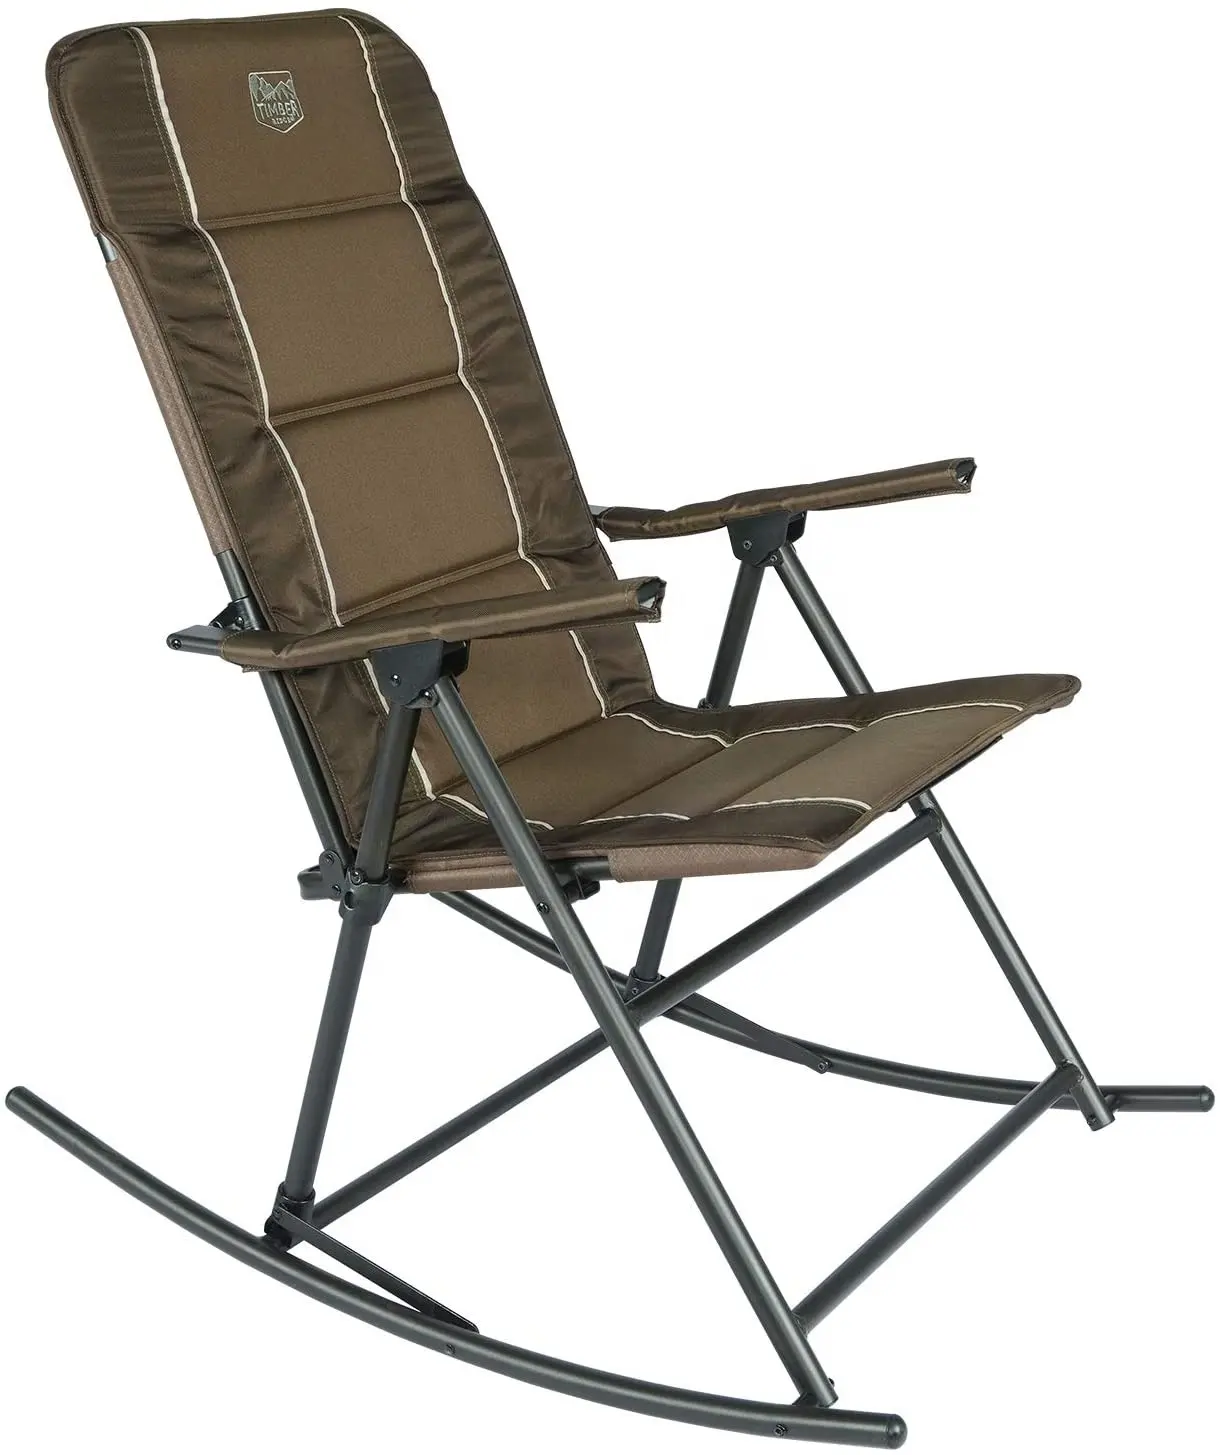 Brown Folding Comfortable And Enjoy Life Camping Rocking Chair With Hard Armrest